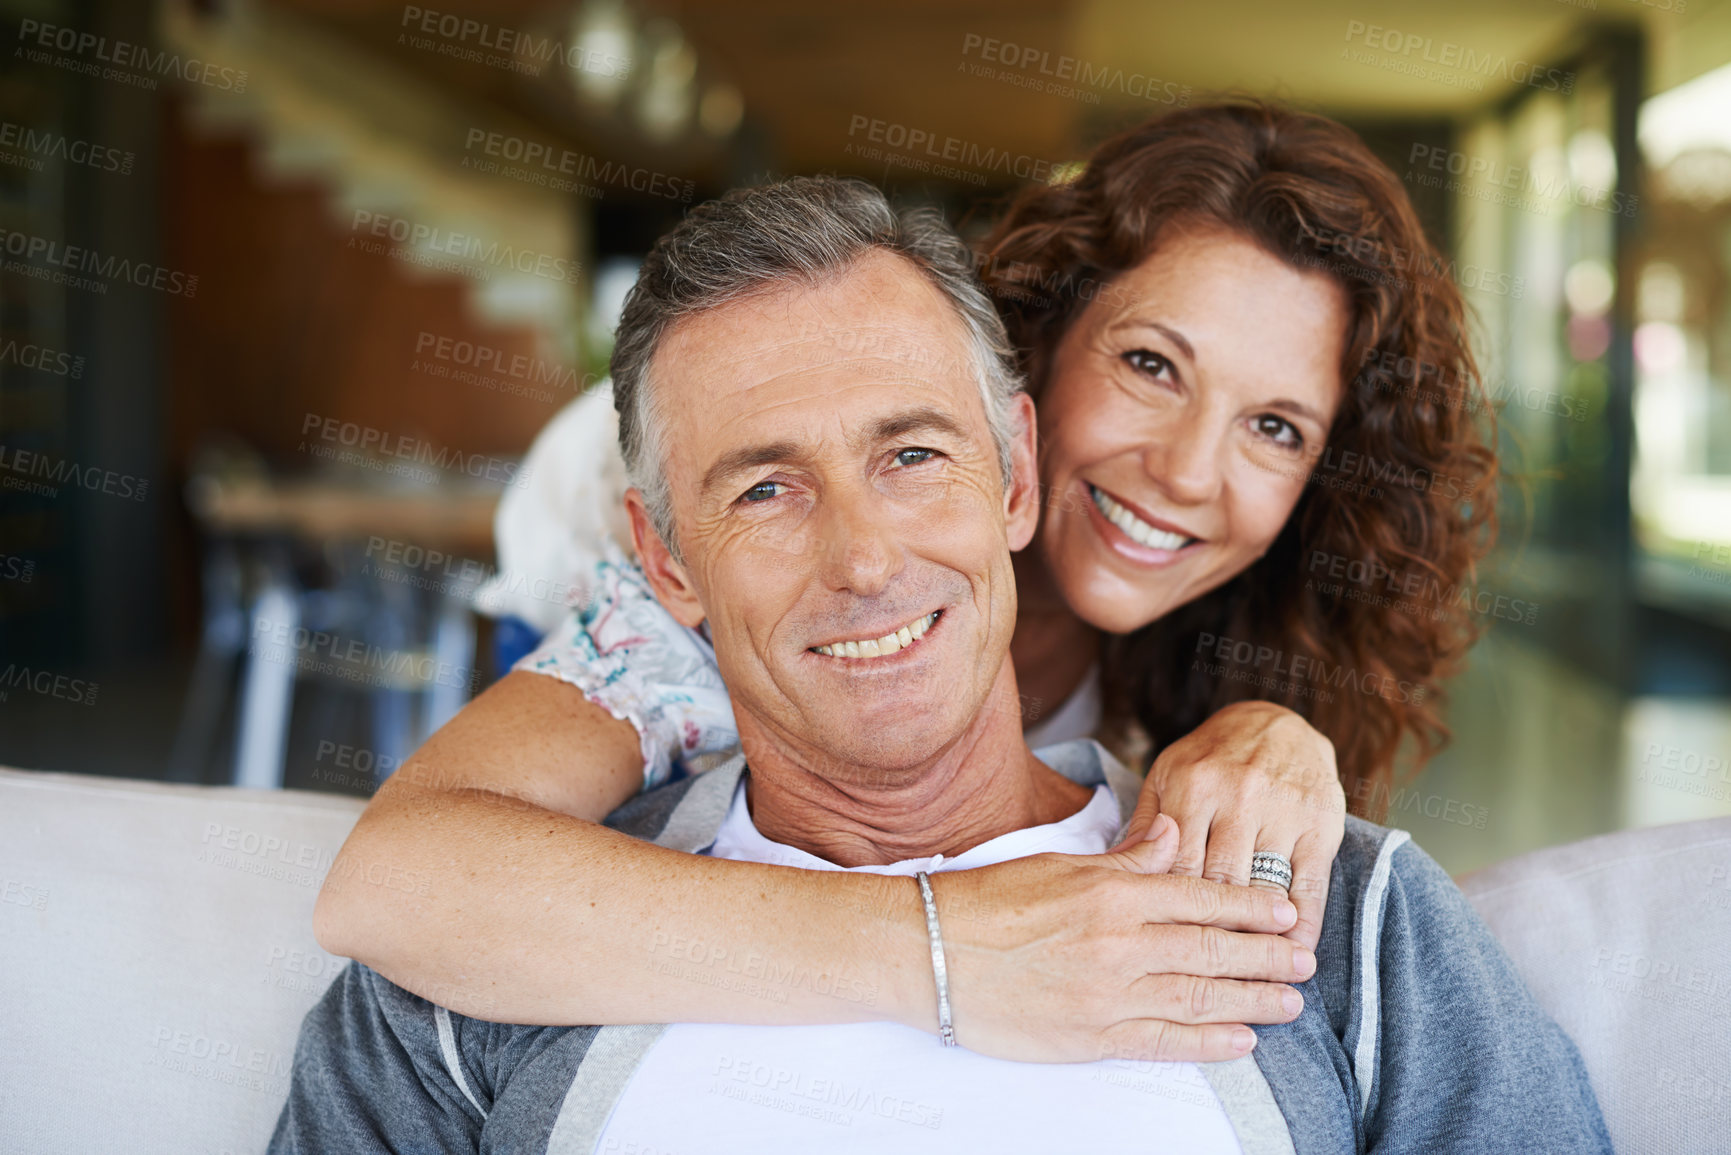 Buy stock photo A handsome mature man being lovingly embraced by his smiling wife